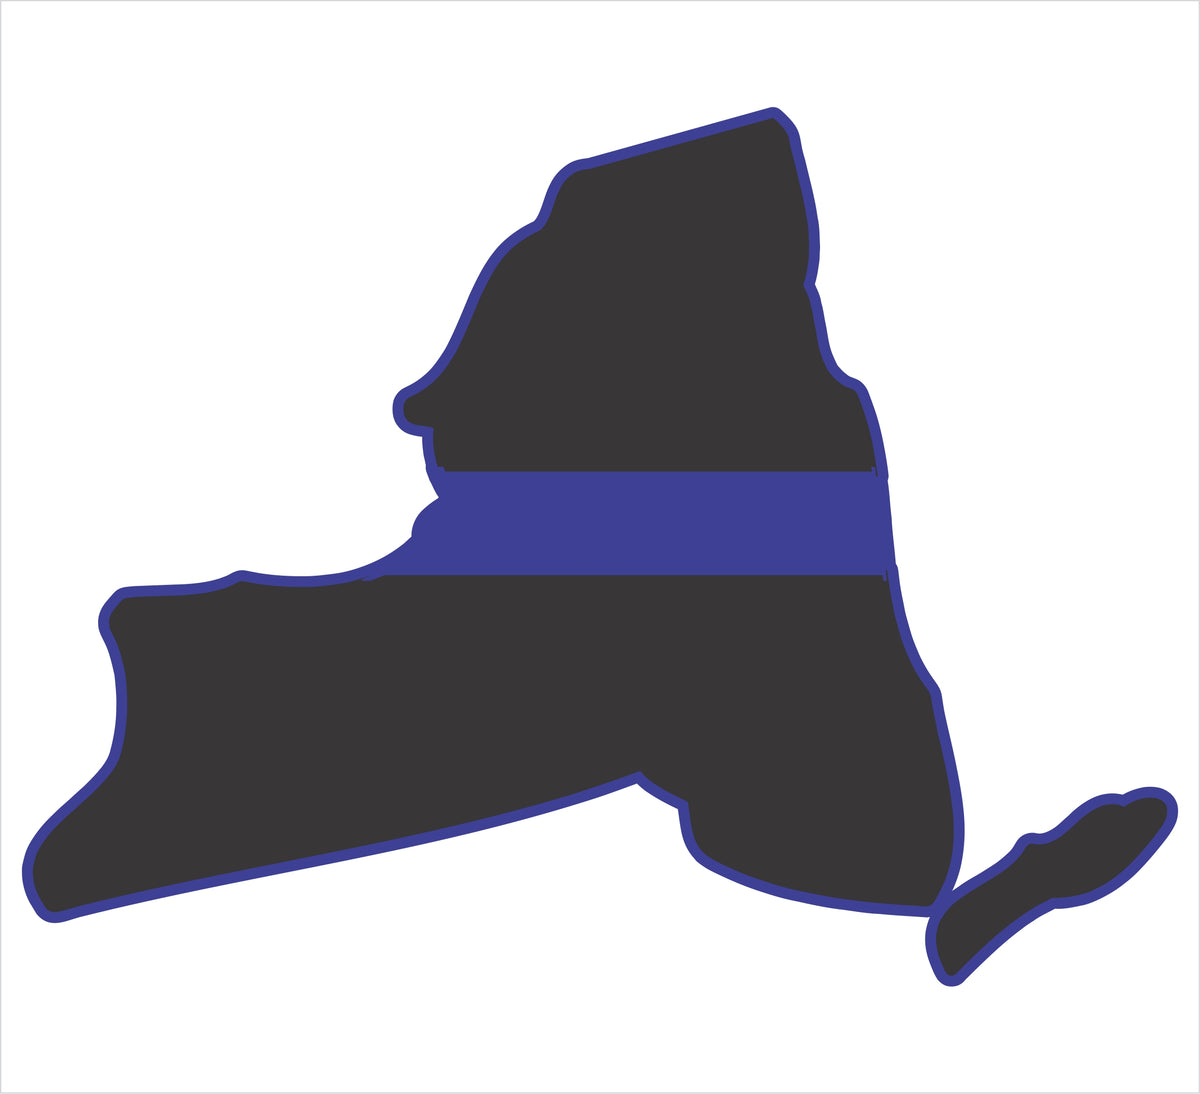 New York Thin Blue Line Decal